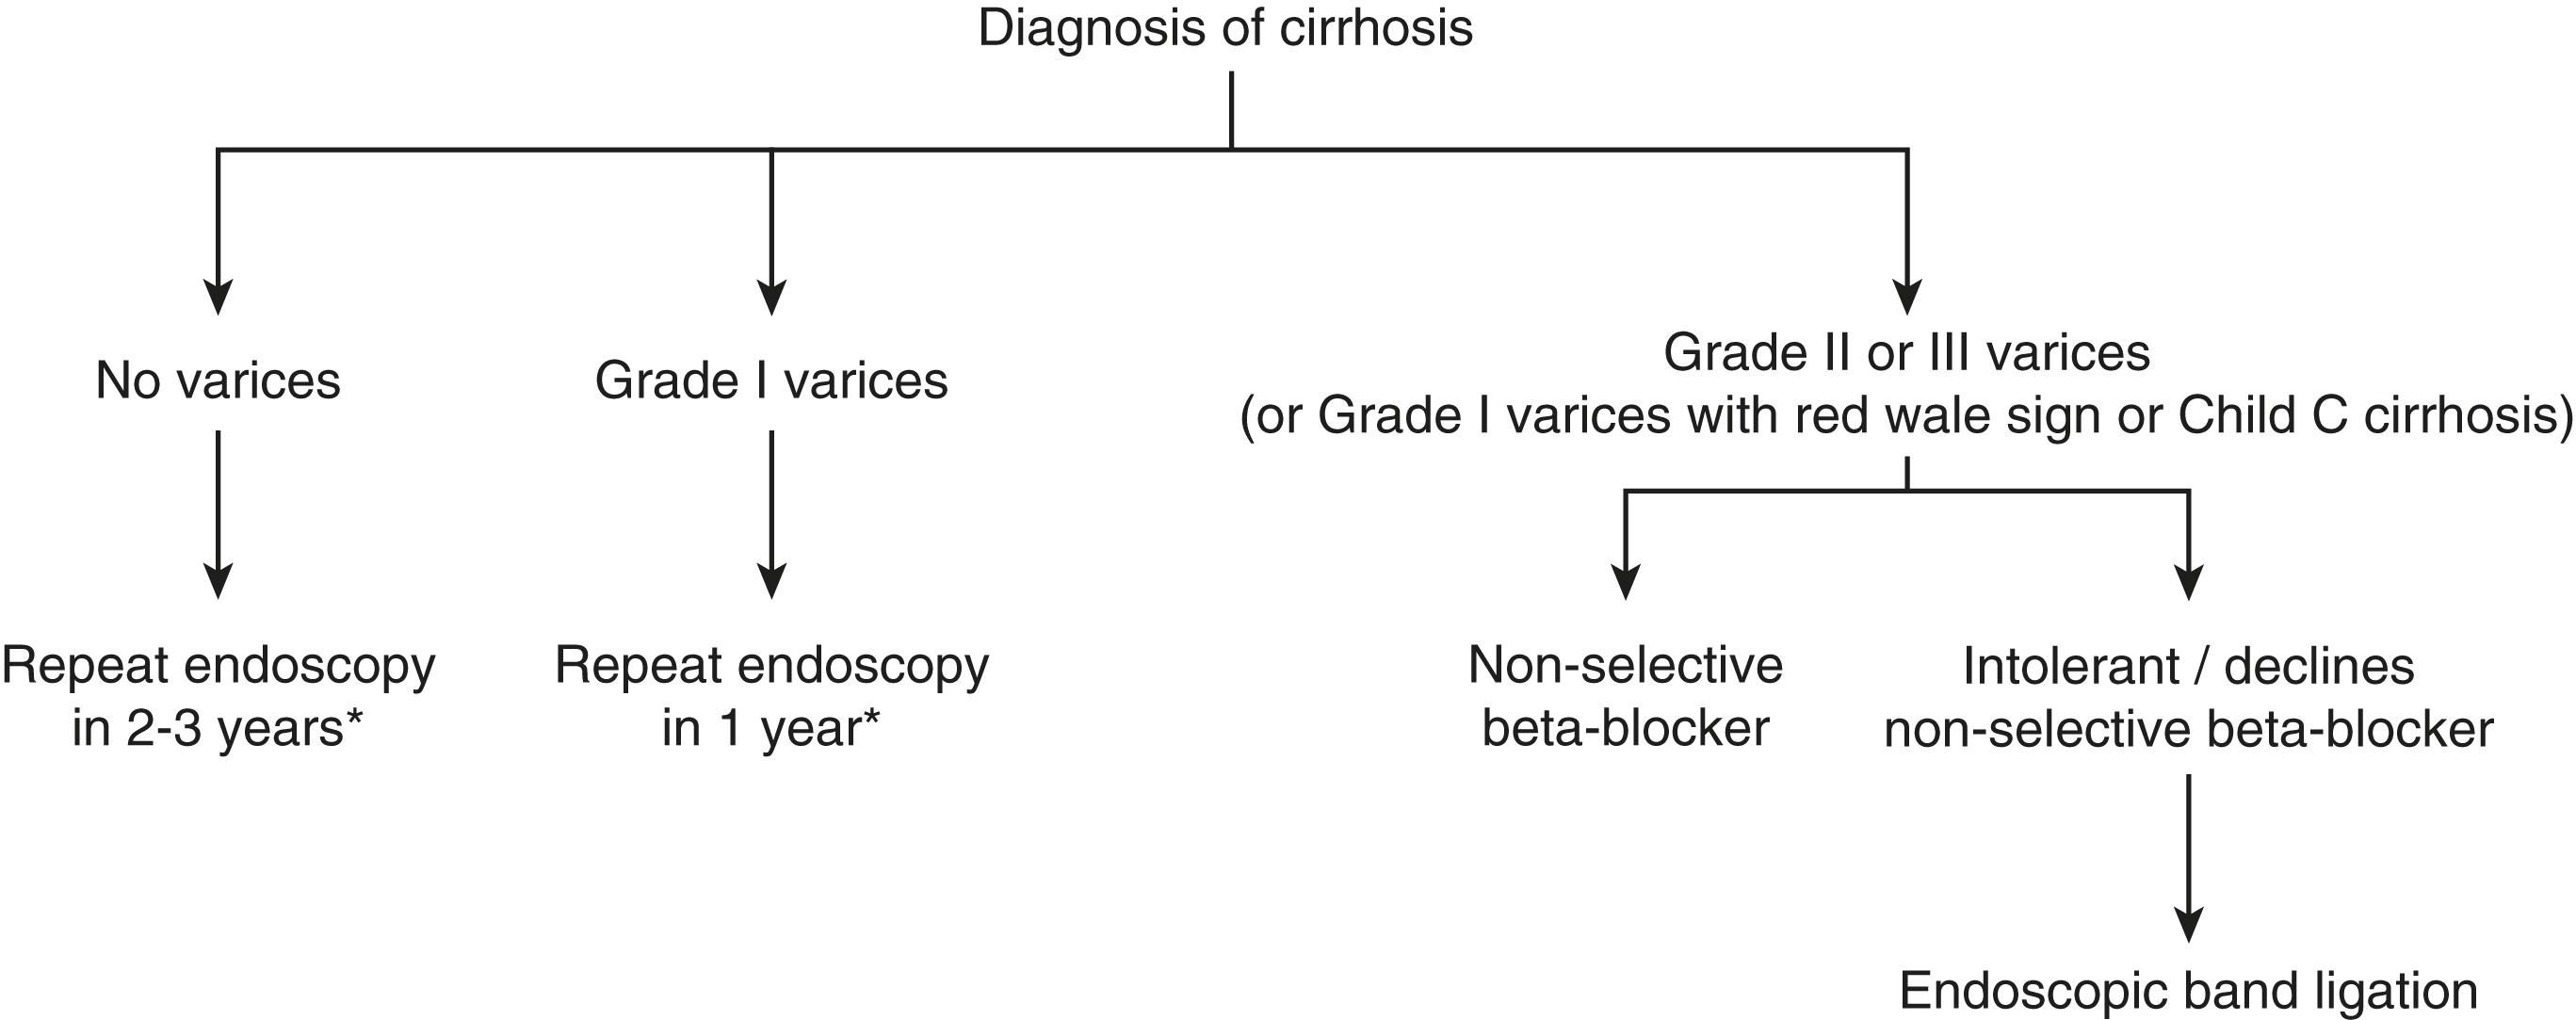 Figure 9.1, Algorithm for primary prevention of variceal bleeding. ∗Interval should be adjusted by the treating clinician if there is clear evidence of progression; endoscopy should also be offered at the time of decompensation.